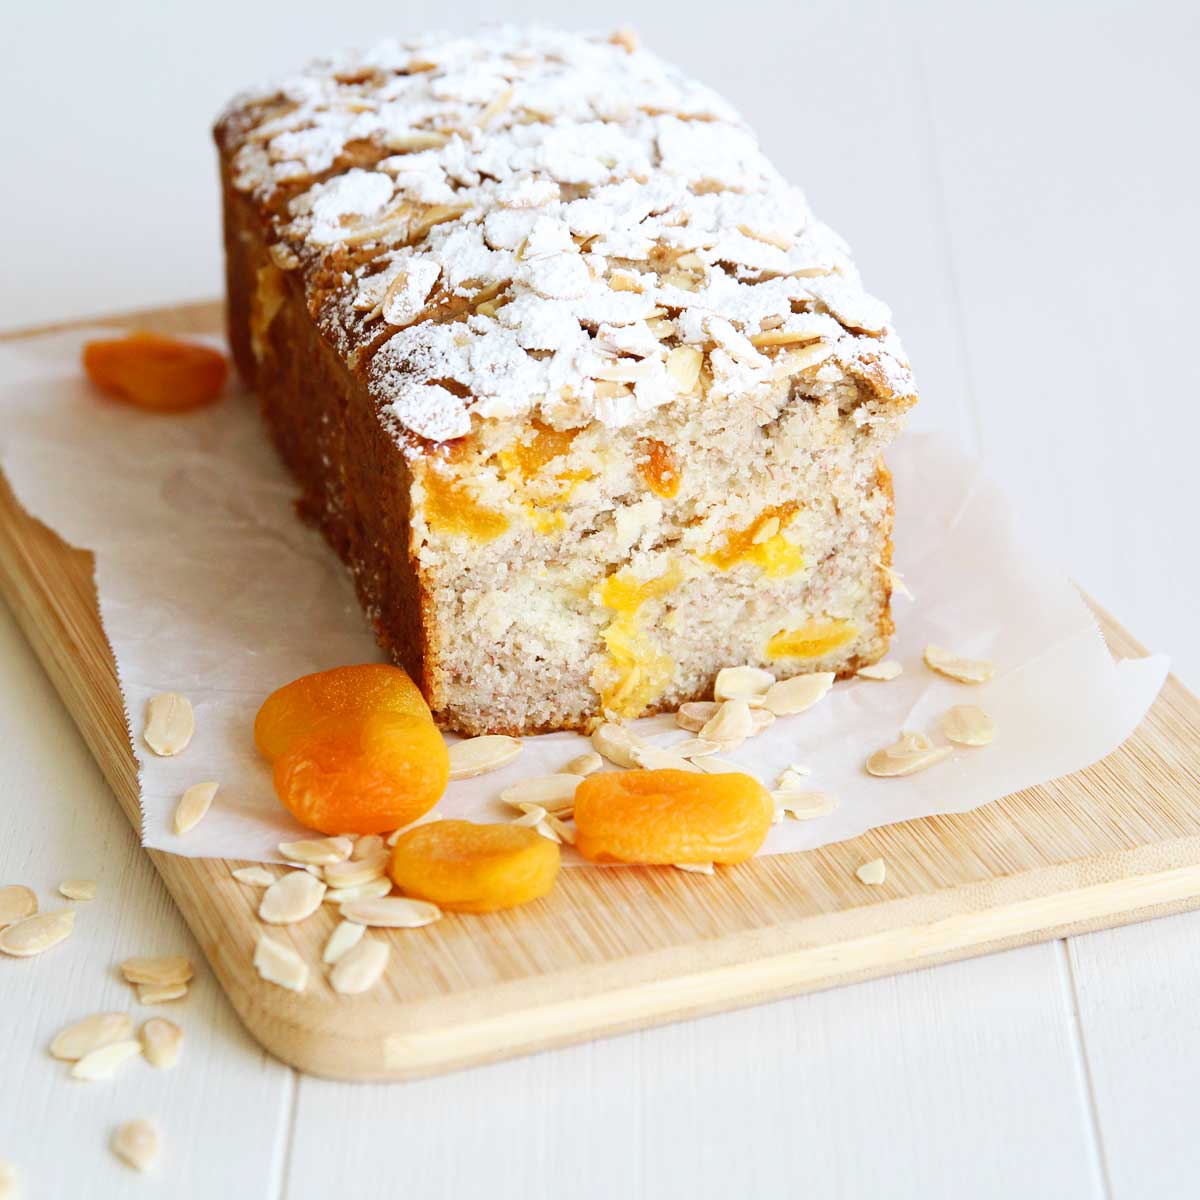 Simply Divine: Moist Vegan Almond Banana Bread with Apricots (Eggless, Dairy Free!) - Lemon Whipped Cream